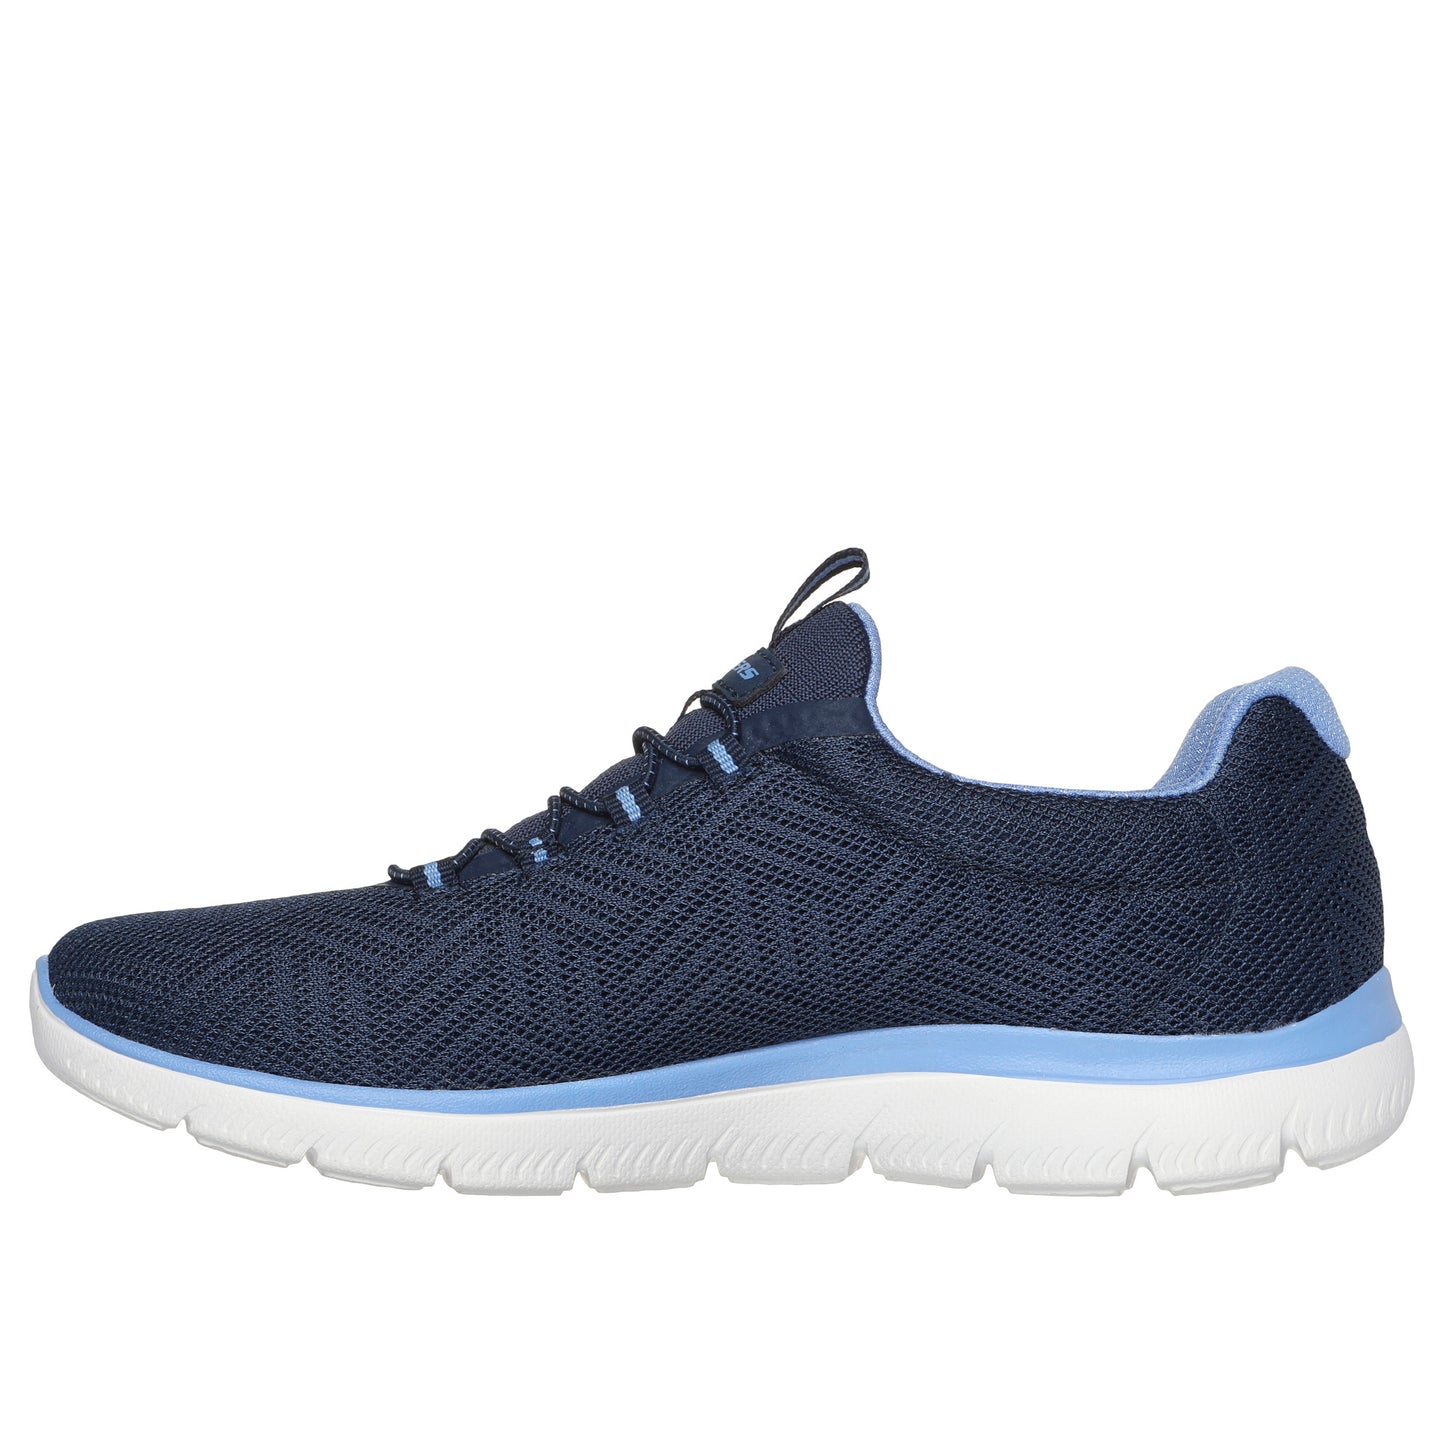 Skechers 150119 Summits-Artistry Chic Navy Blue Trainers